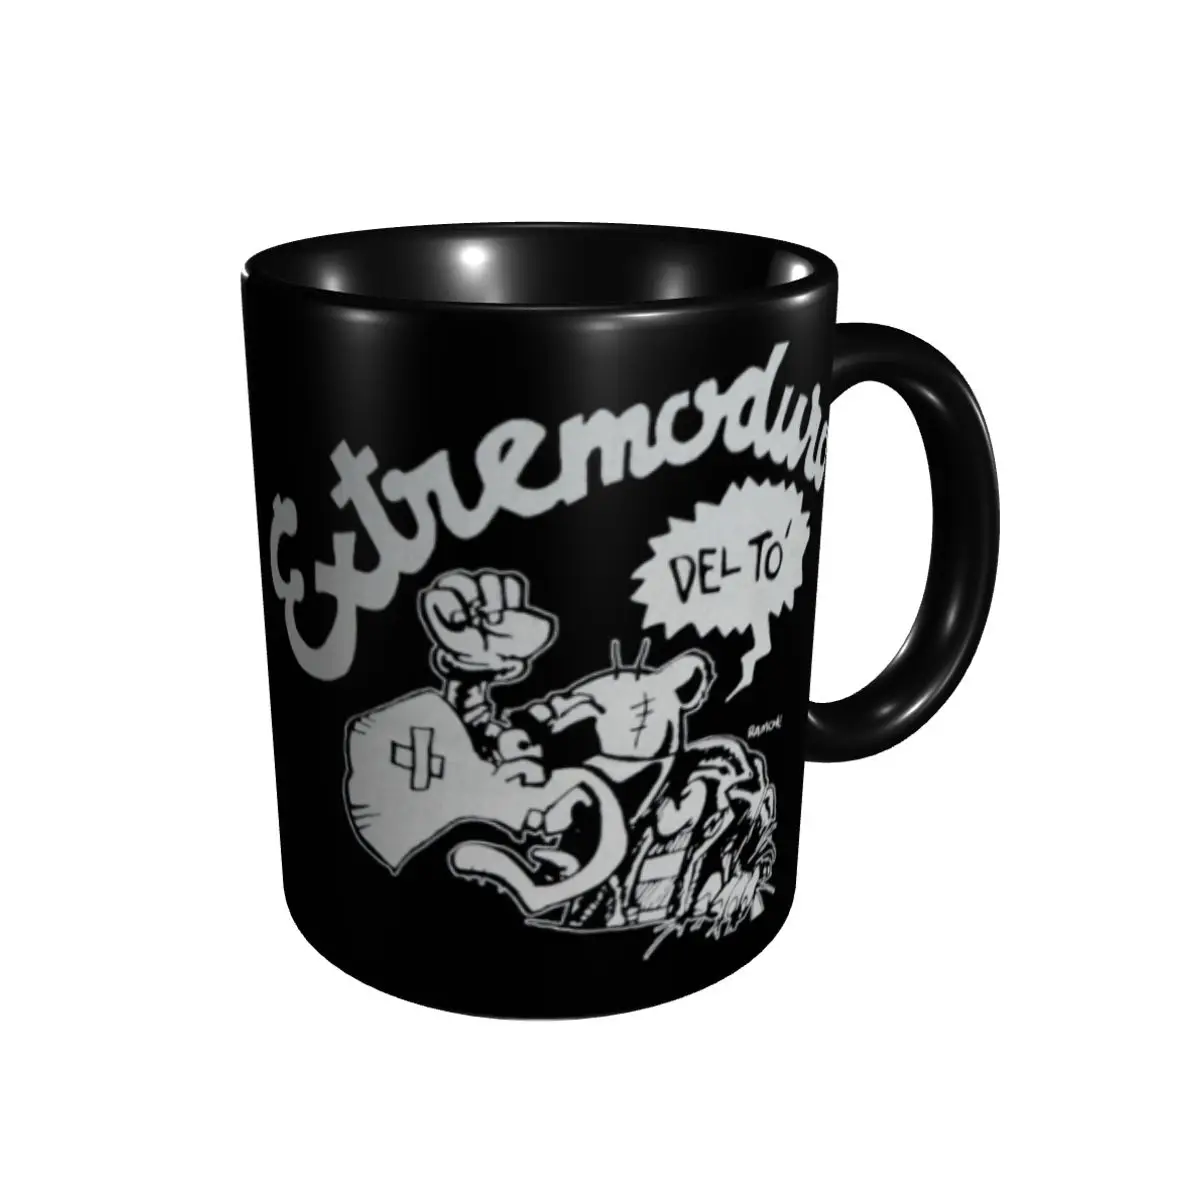 

Promo Cuanto Sabes Sobre Extremoduro Parte Mugs Casual Graphic Cups Mugs Print Humor Graphic beer mugs